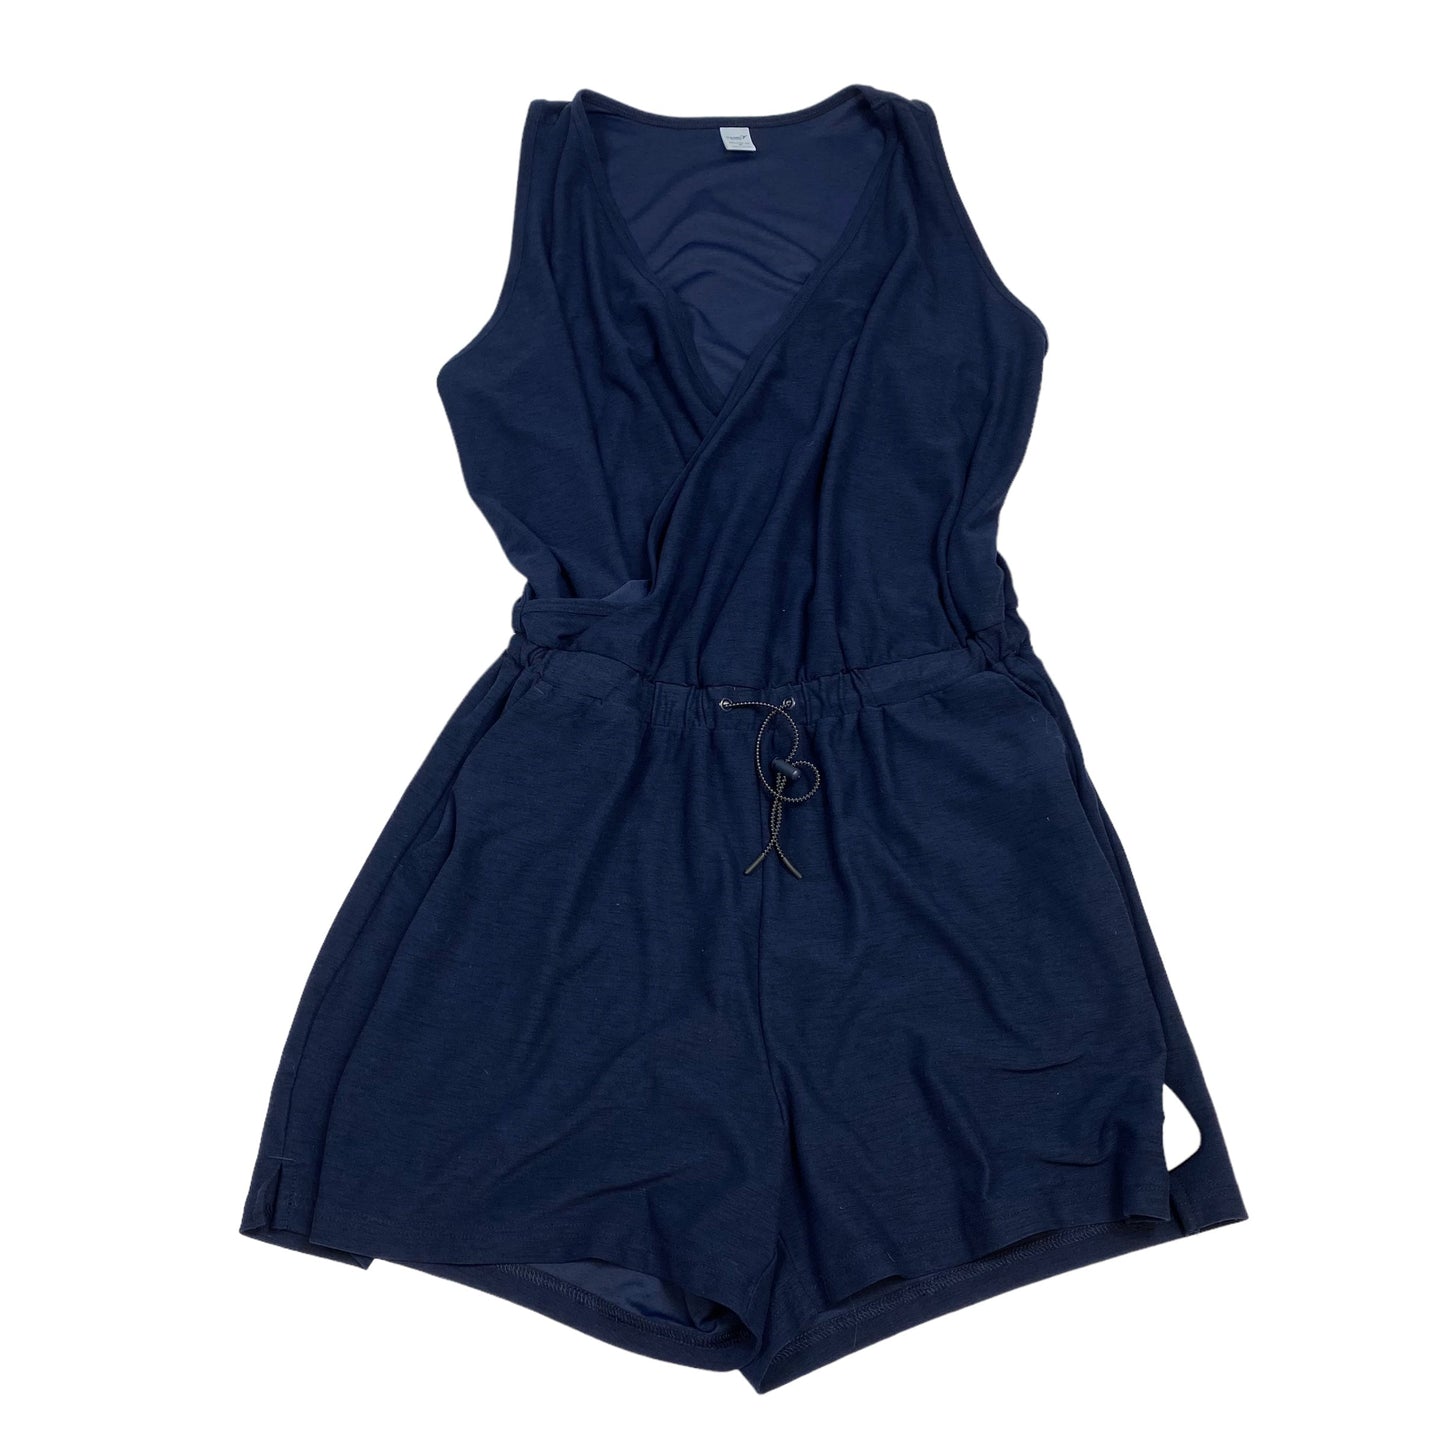 Athletic Dress By Old Navy  Size: M